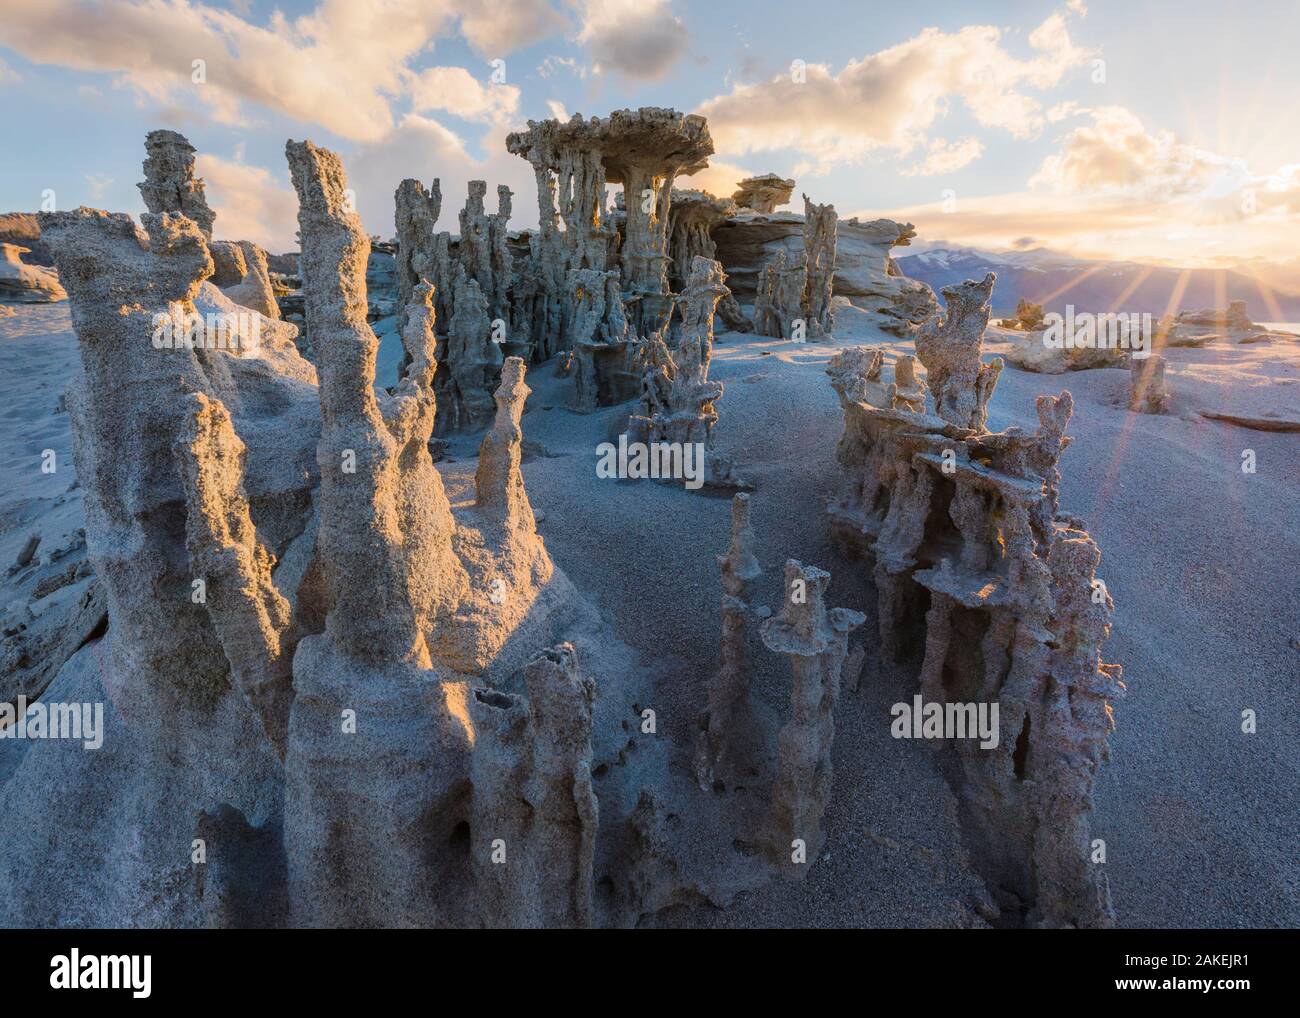 Tufa towers along Mono Lake, which form as sodium carbonate reacts with calcium rich spring water. Mono Lake, California, USA. June 2017. Stock Photo